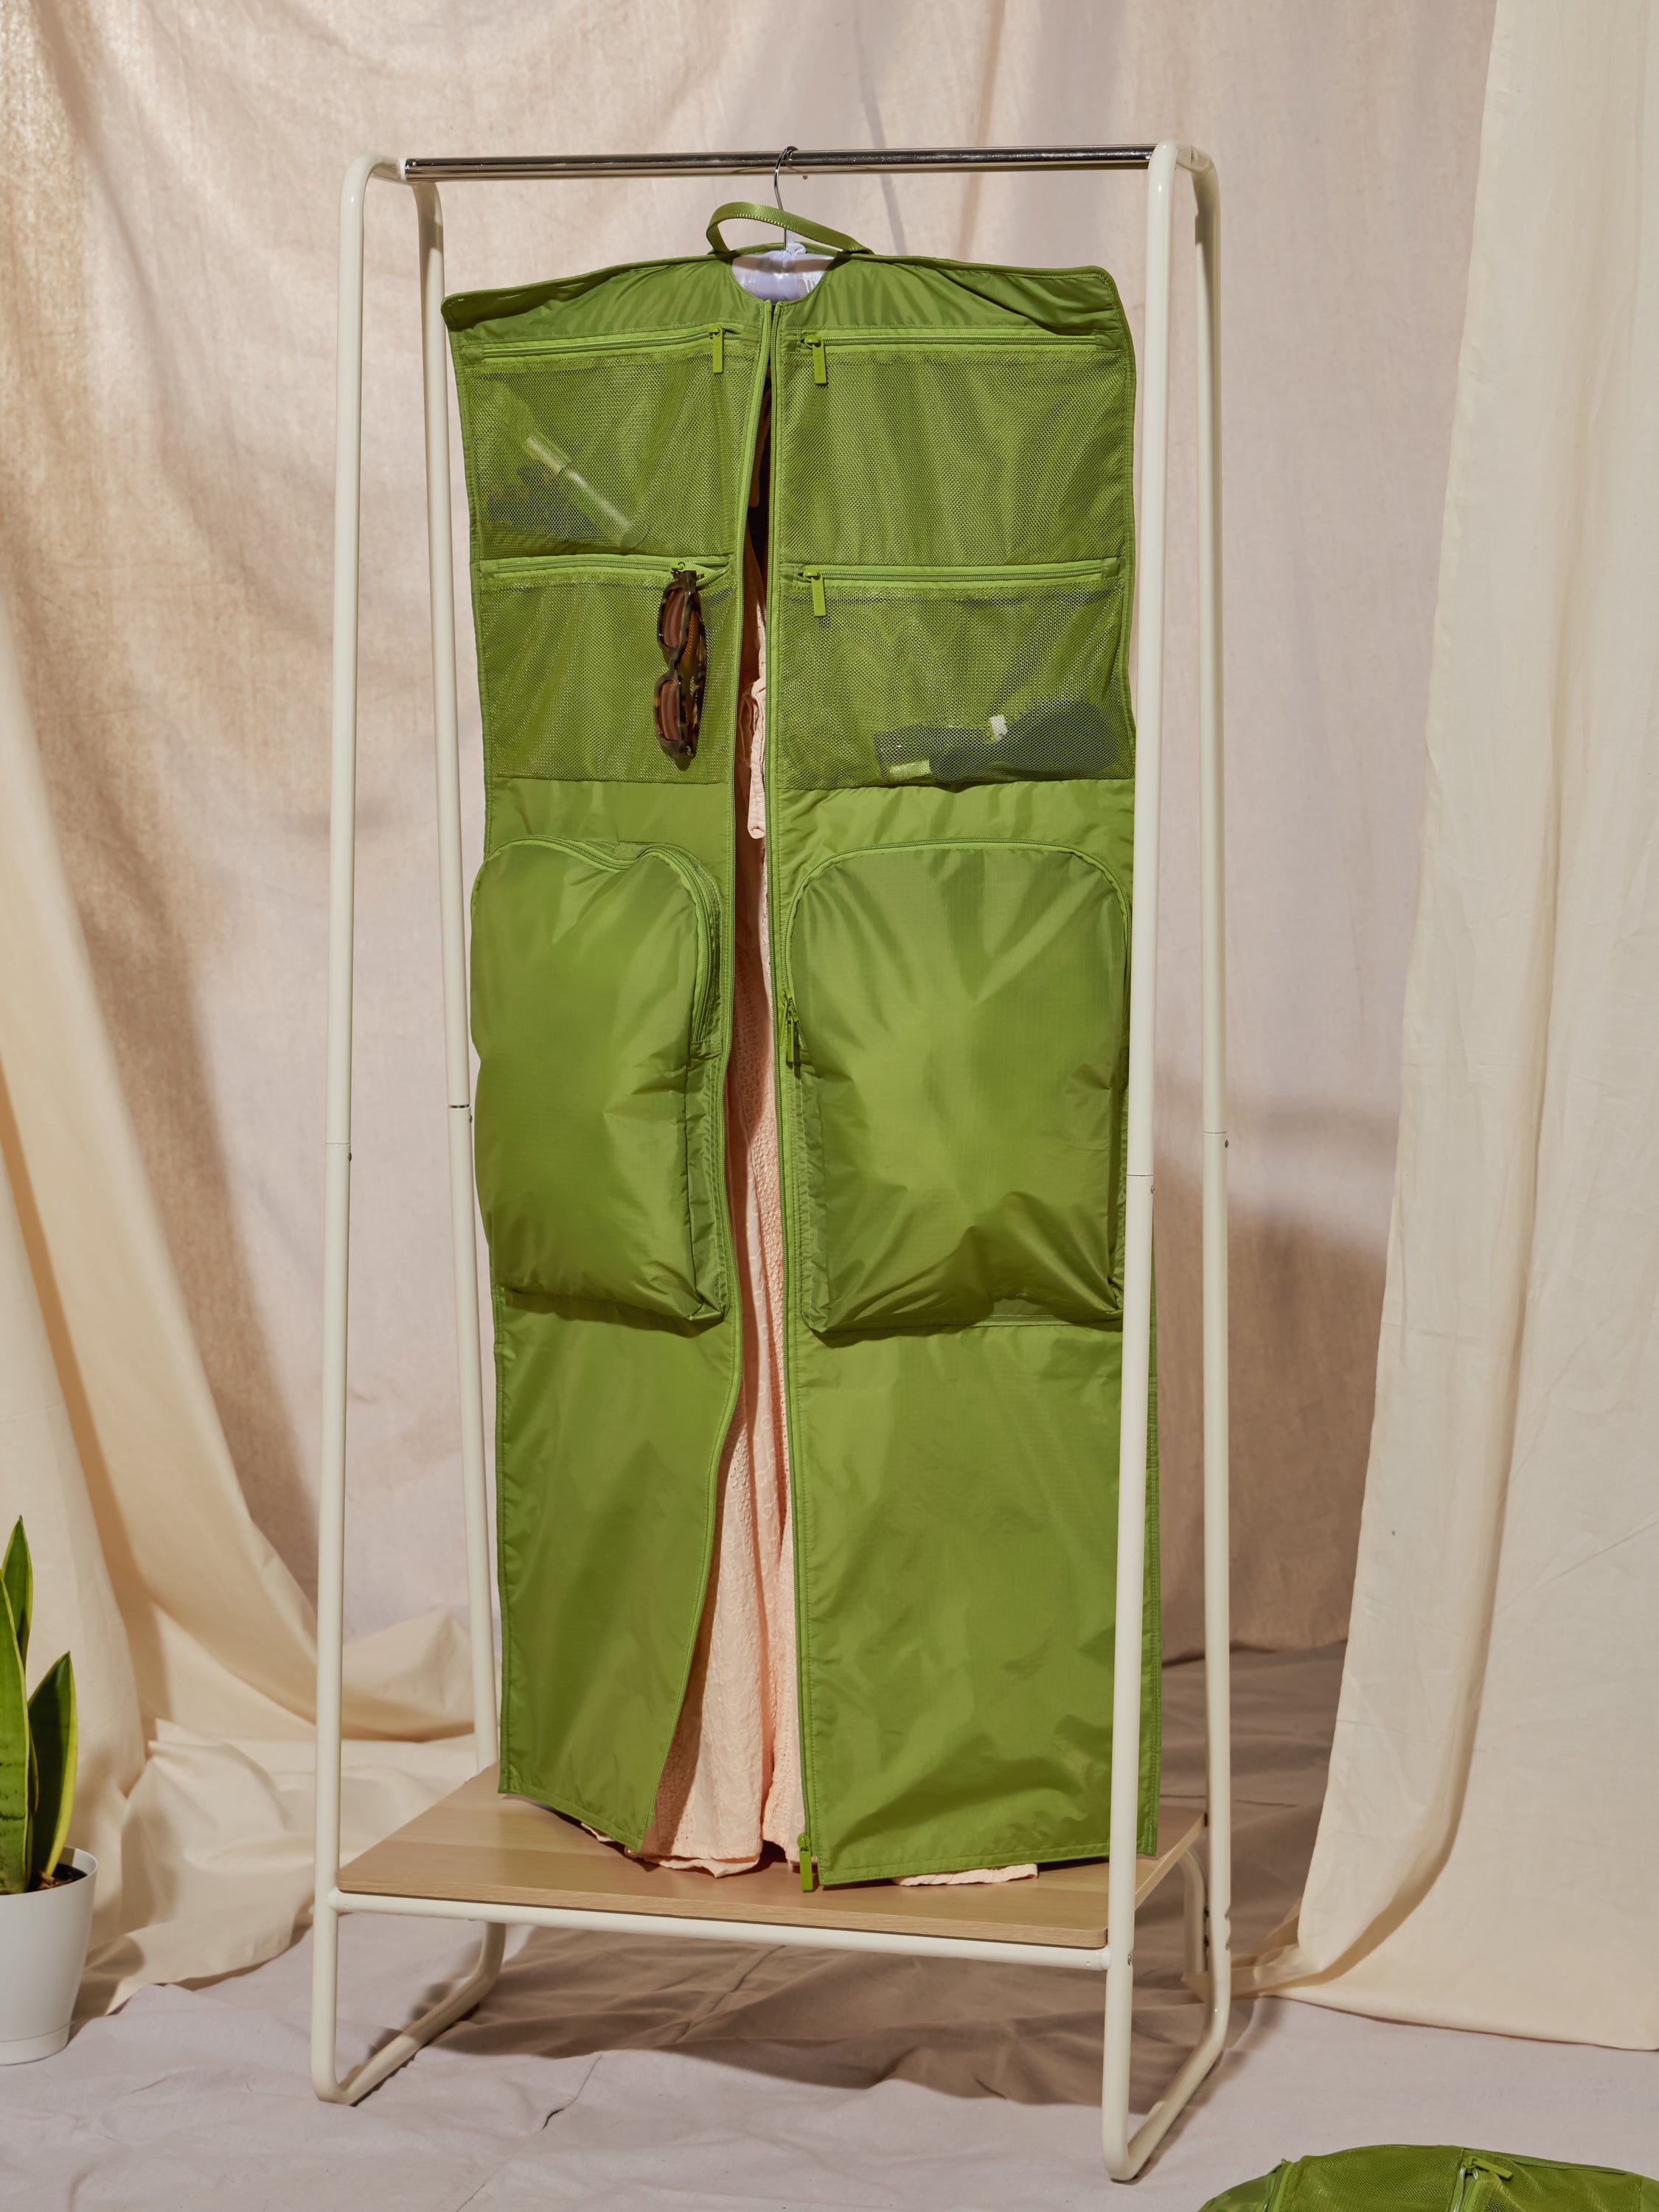 CALPAK Compakt large hanging garment travel bag with mesh pockets and water resistant exterior in palm green